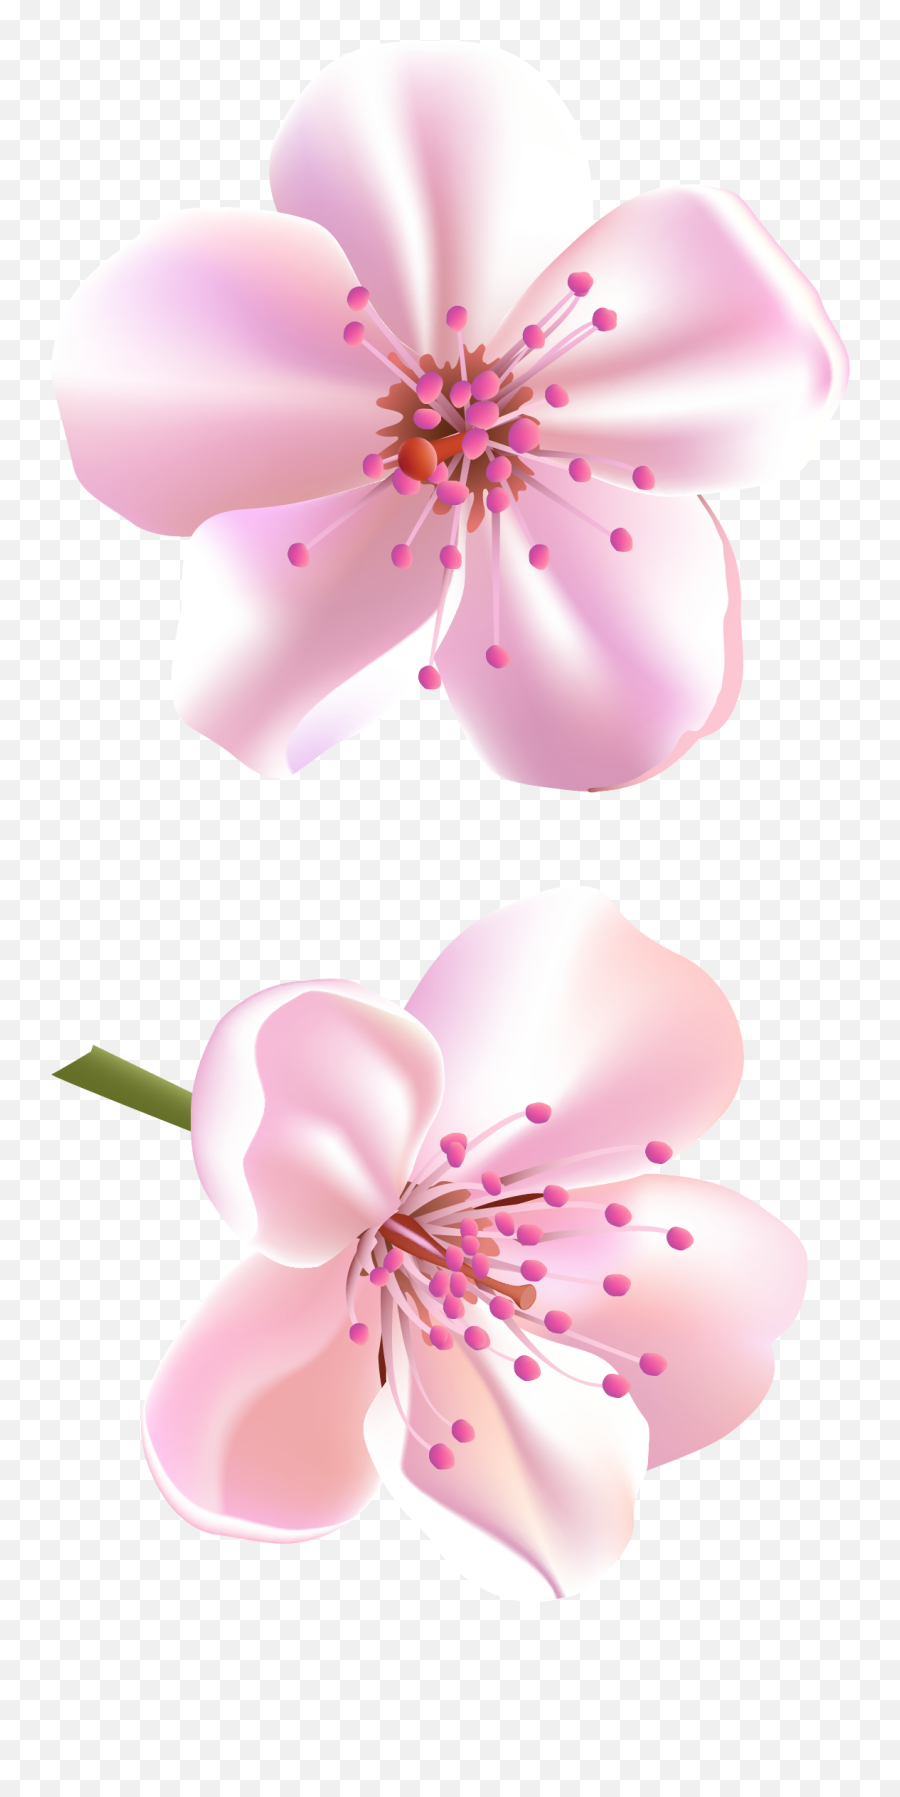 Download Free Blossom Vector Flower Image Icon - Cheerry Blossom Flower Clipart Png,Sakura Flower Icon